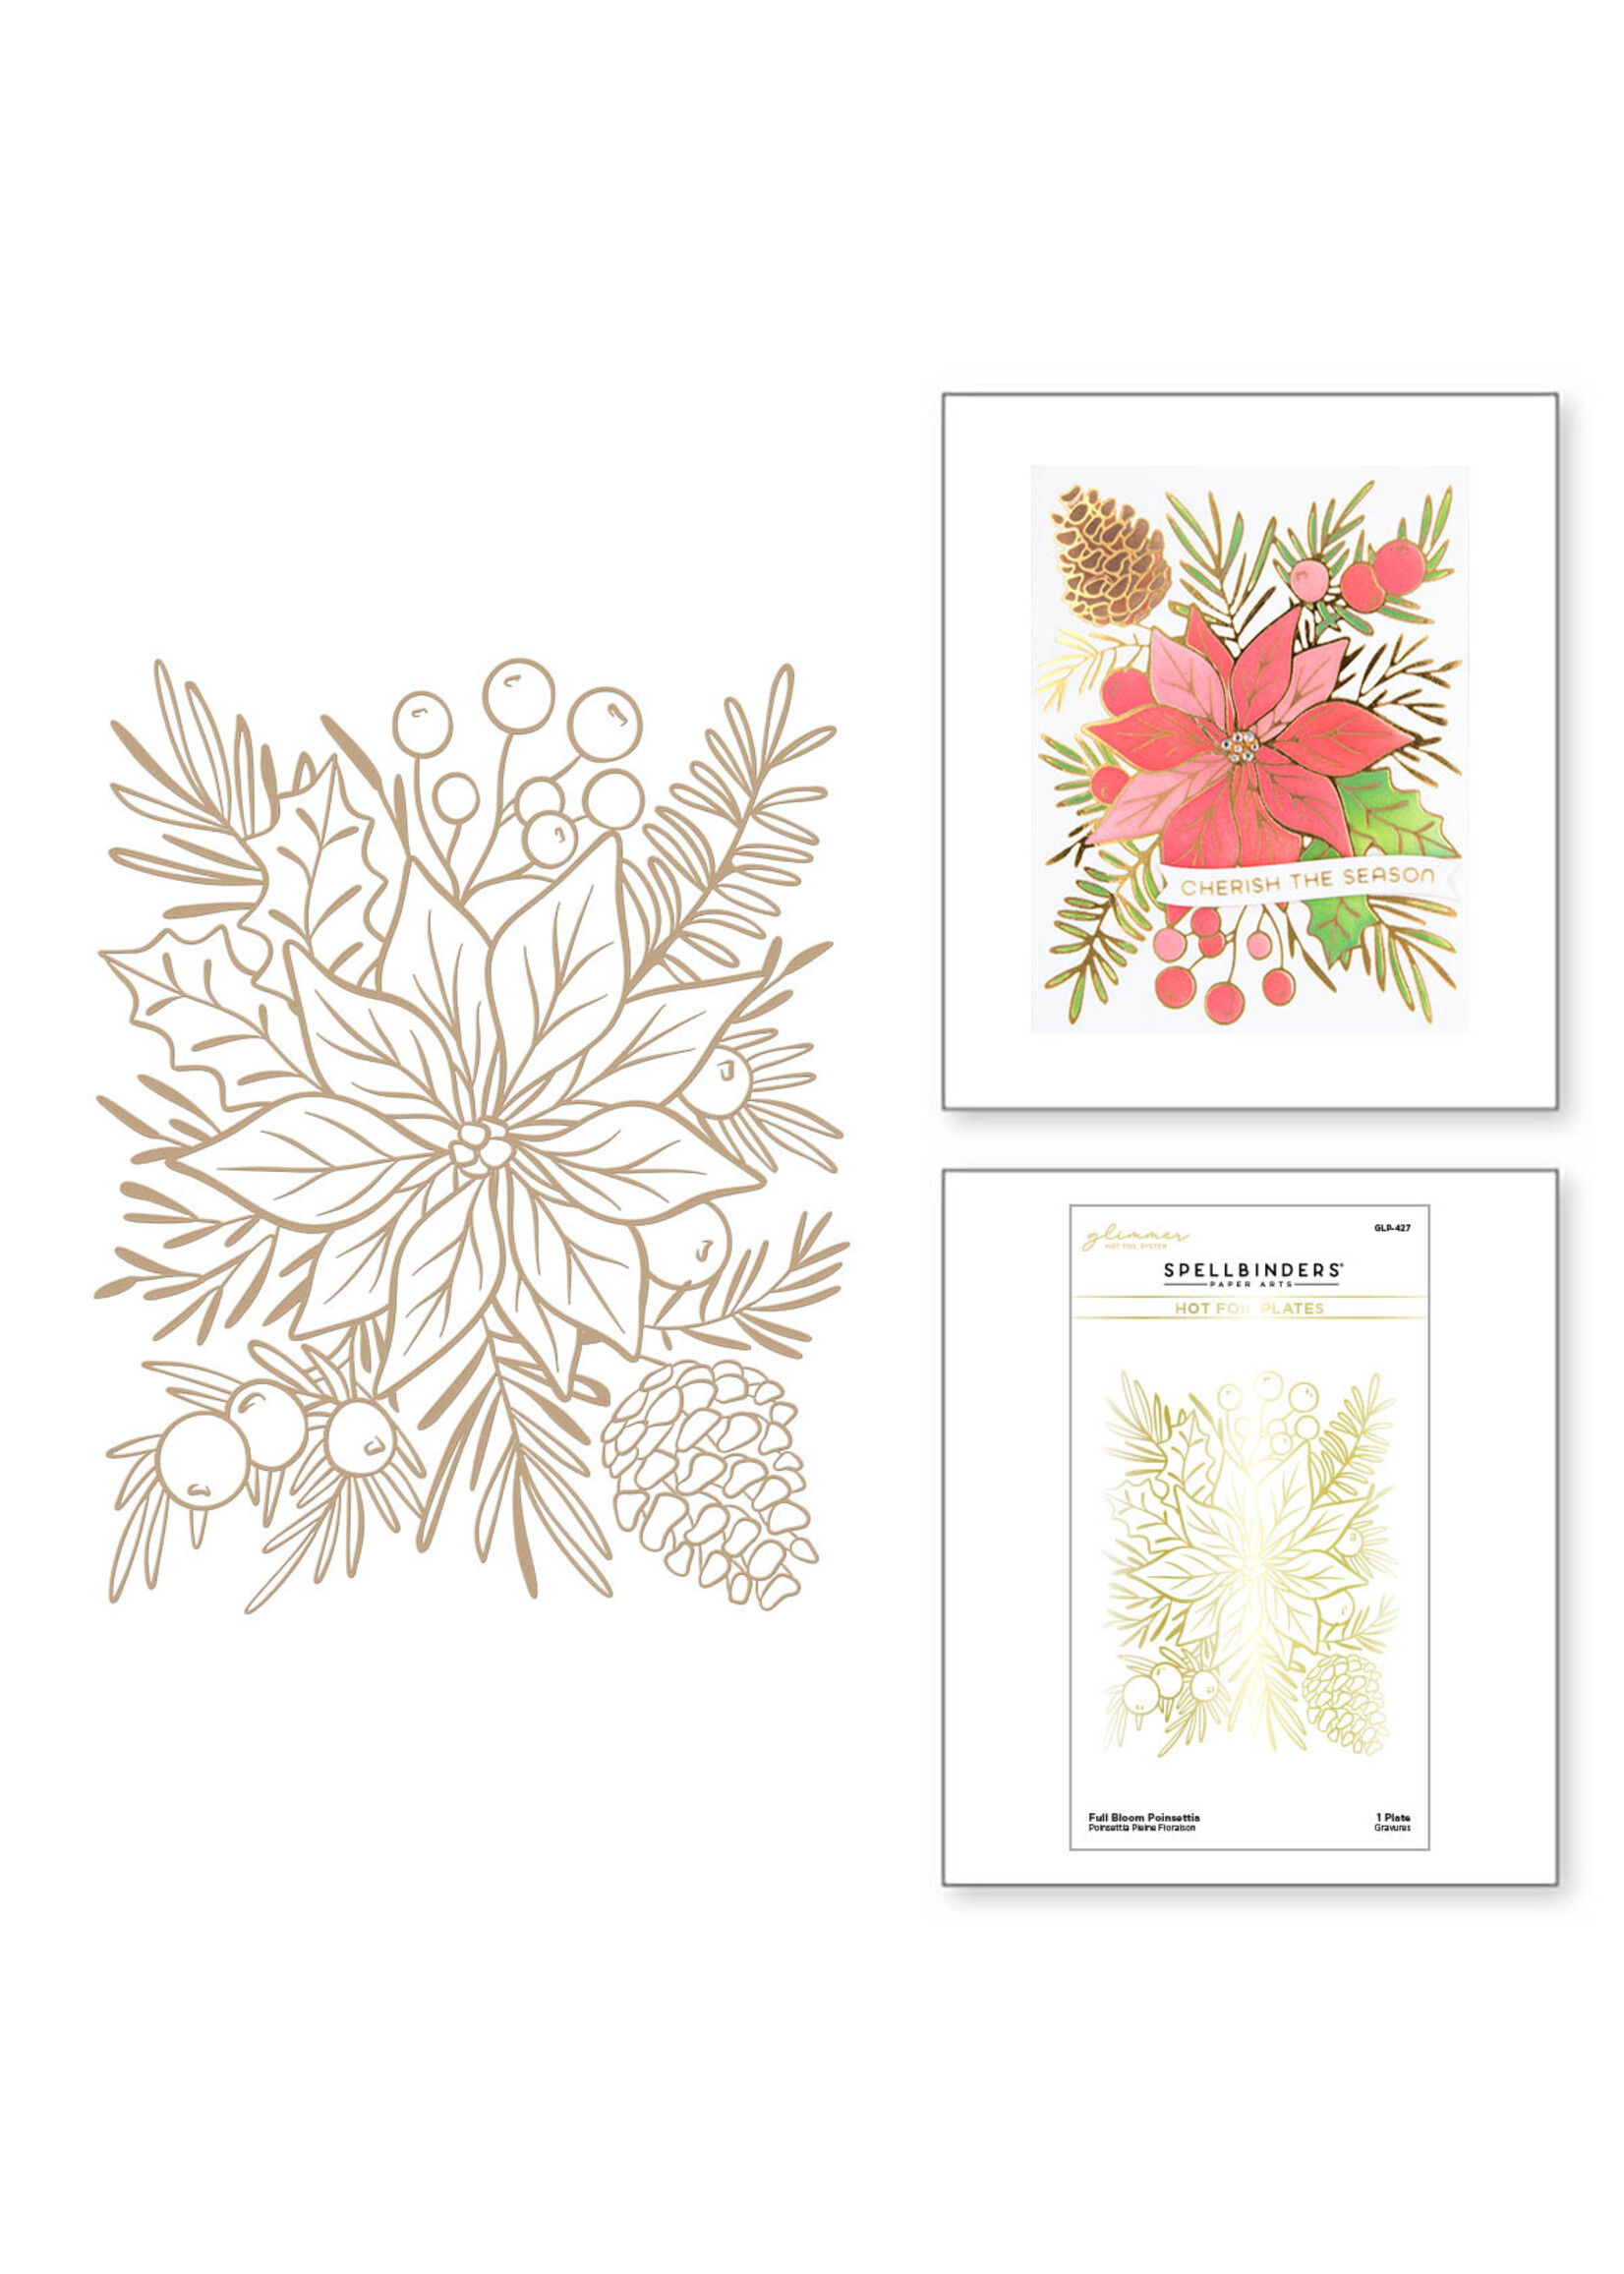 spellbinders Full Bloom Poinsettia Hot Foil Plate from the Glimmer for the Holidays Collection